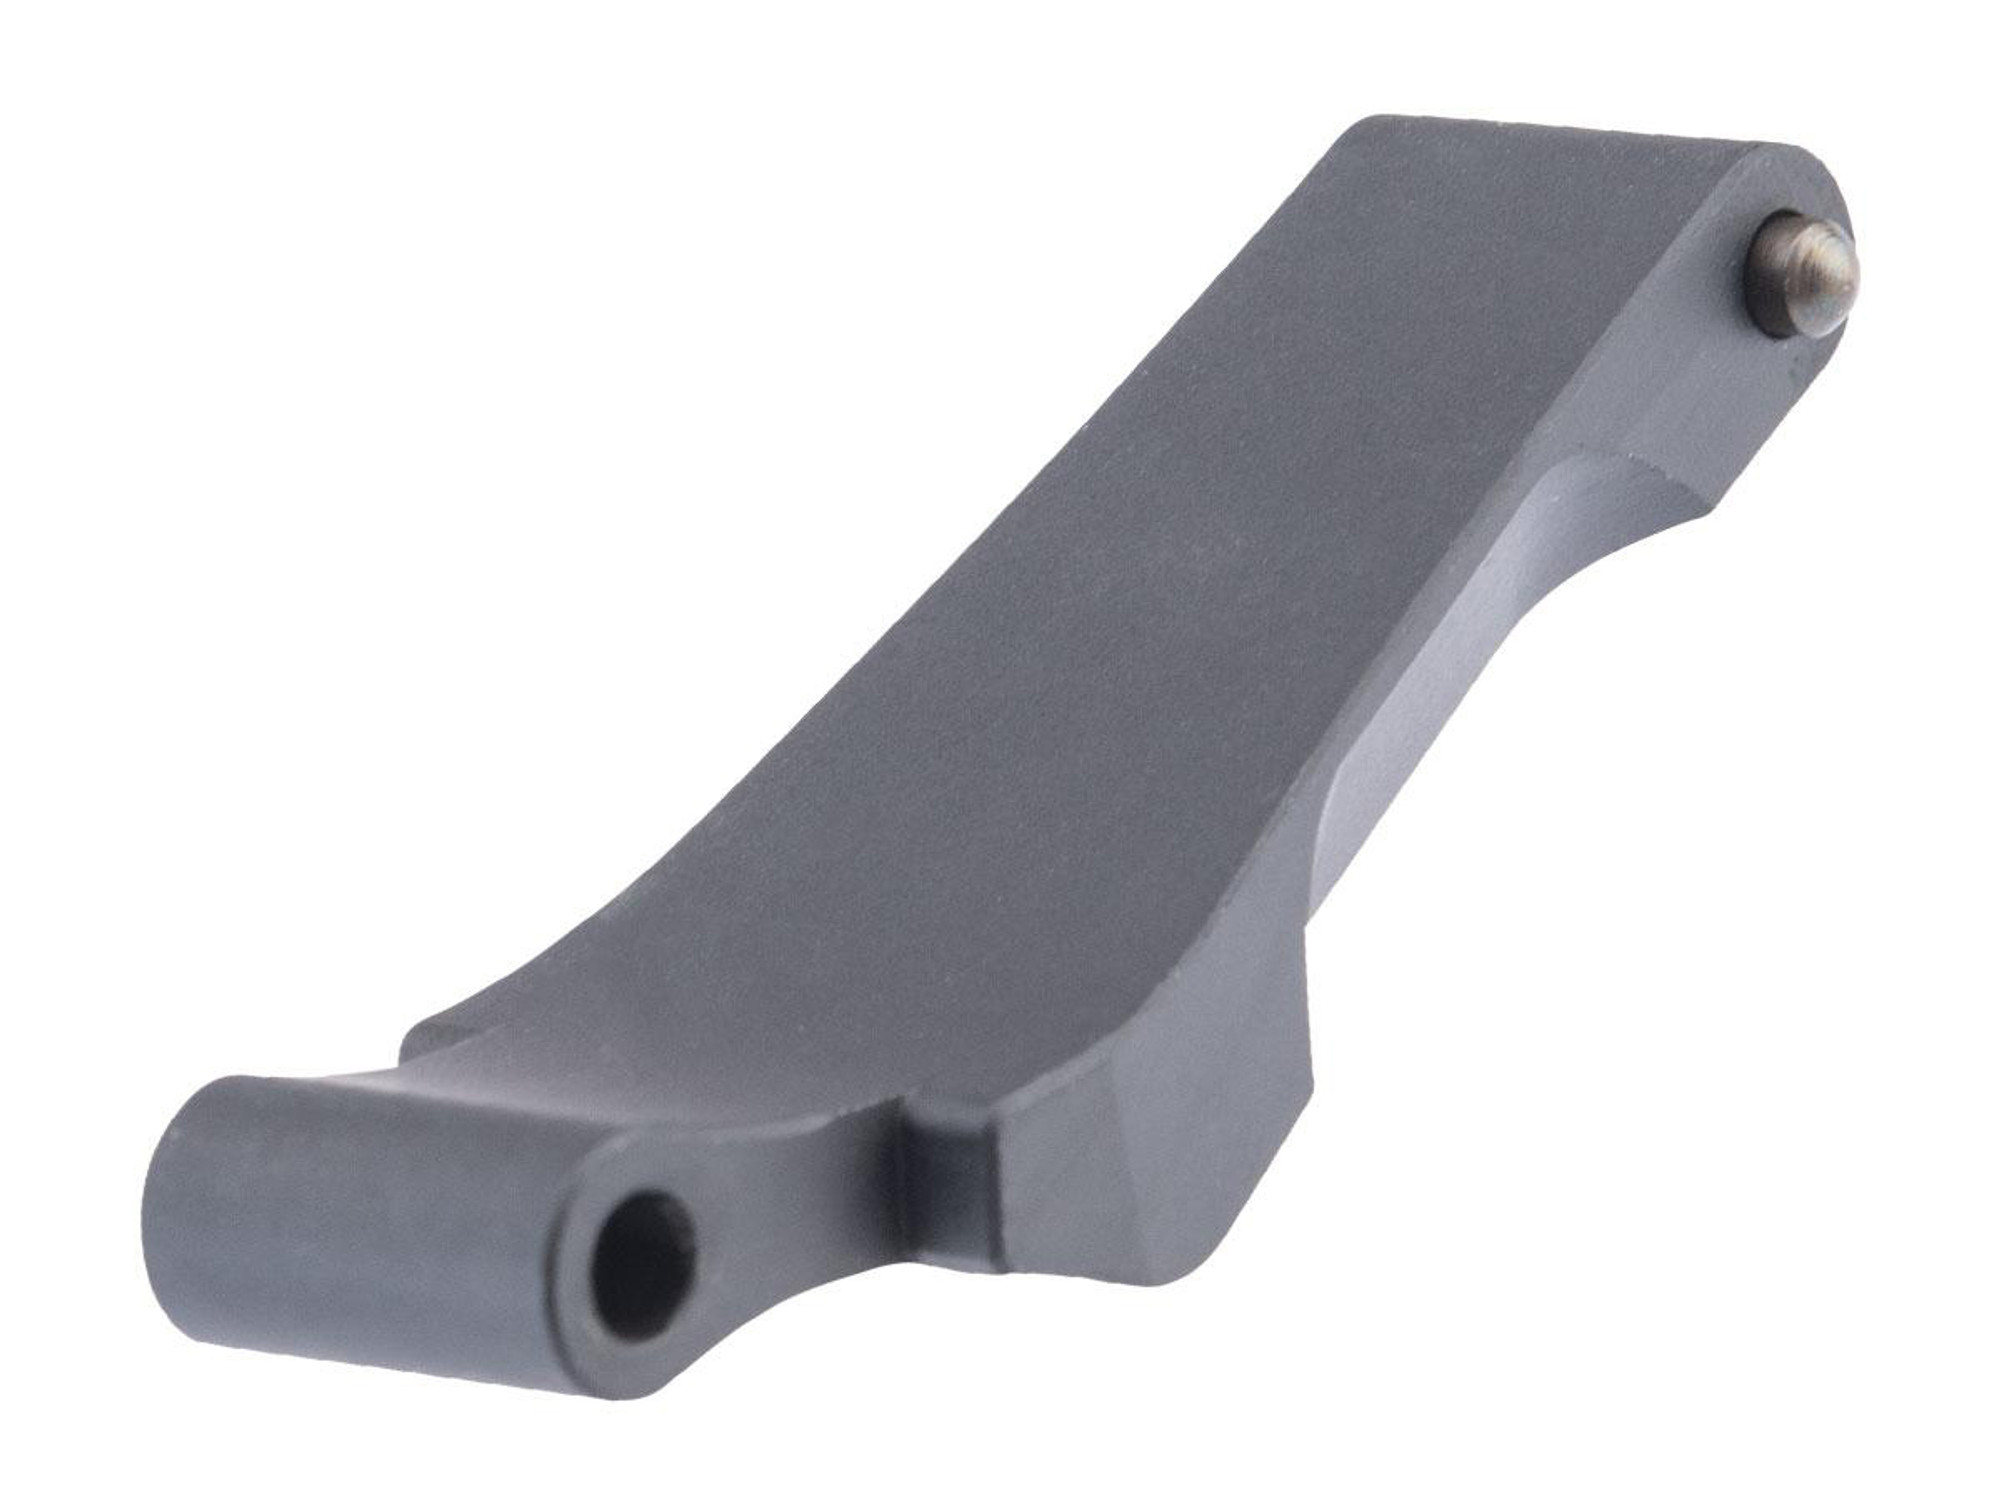 Knight's Armament Licensed Combat Trigger Guard for M4/M16 Airsoft AEG Rifles by ZShot